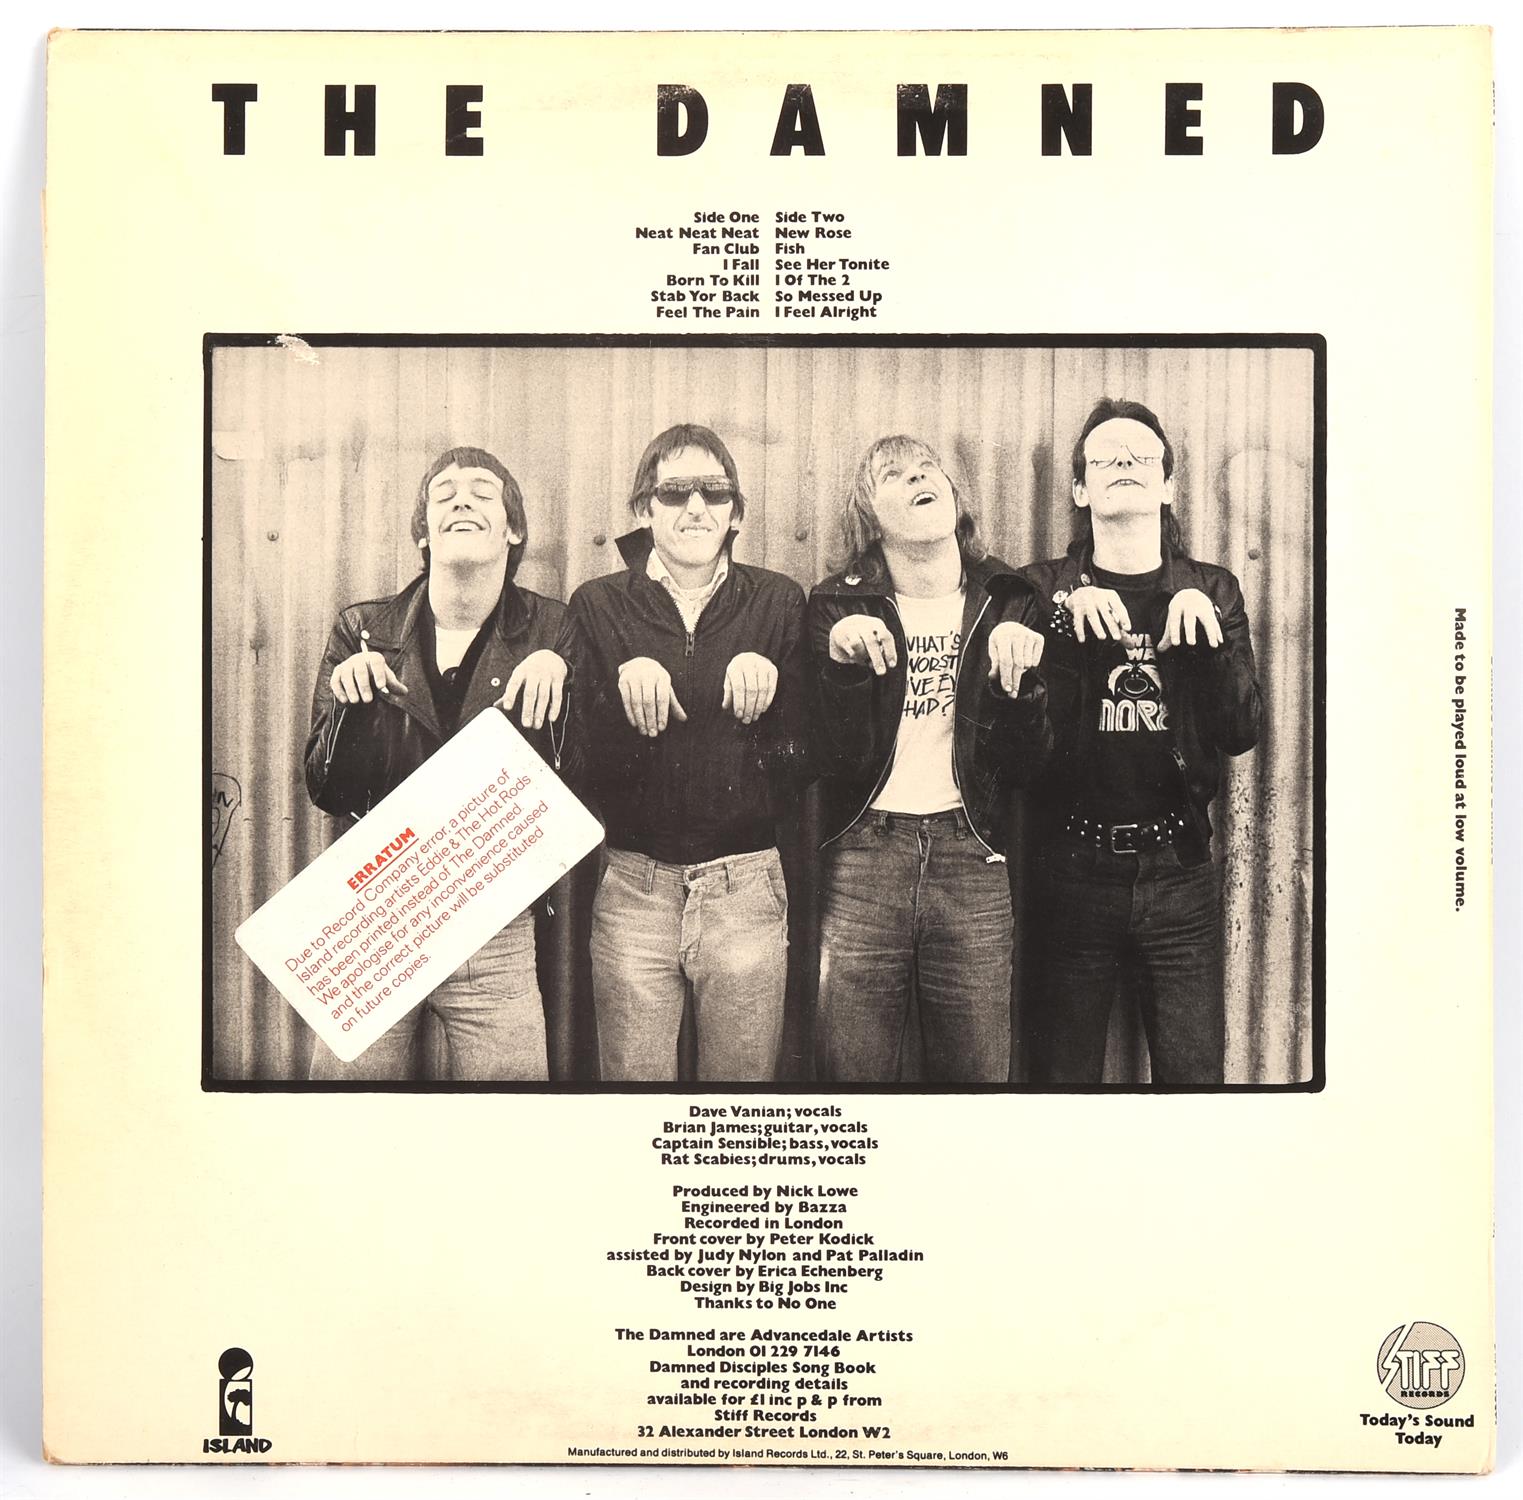 Vinyl Record The Damned - Damned Damned Damned 1977 Stiff Records. First pressing SEEZ 1 A1 / B1 - Image 2 of 2